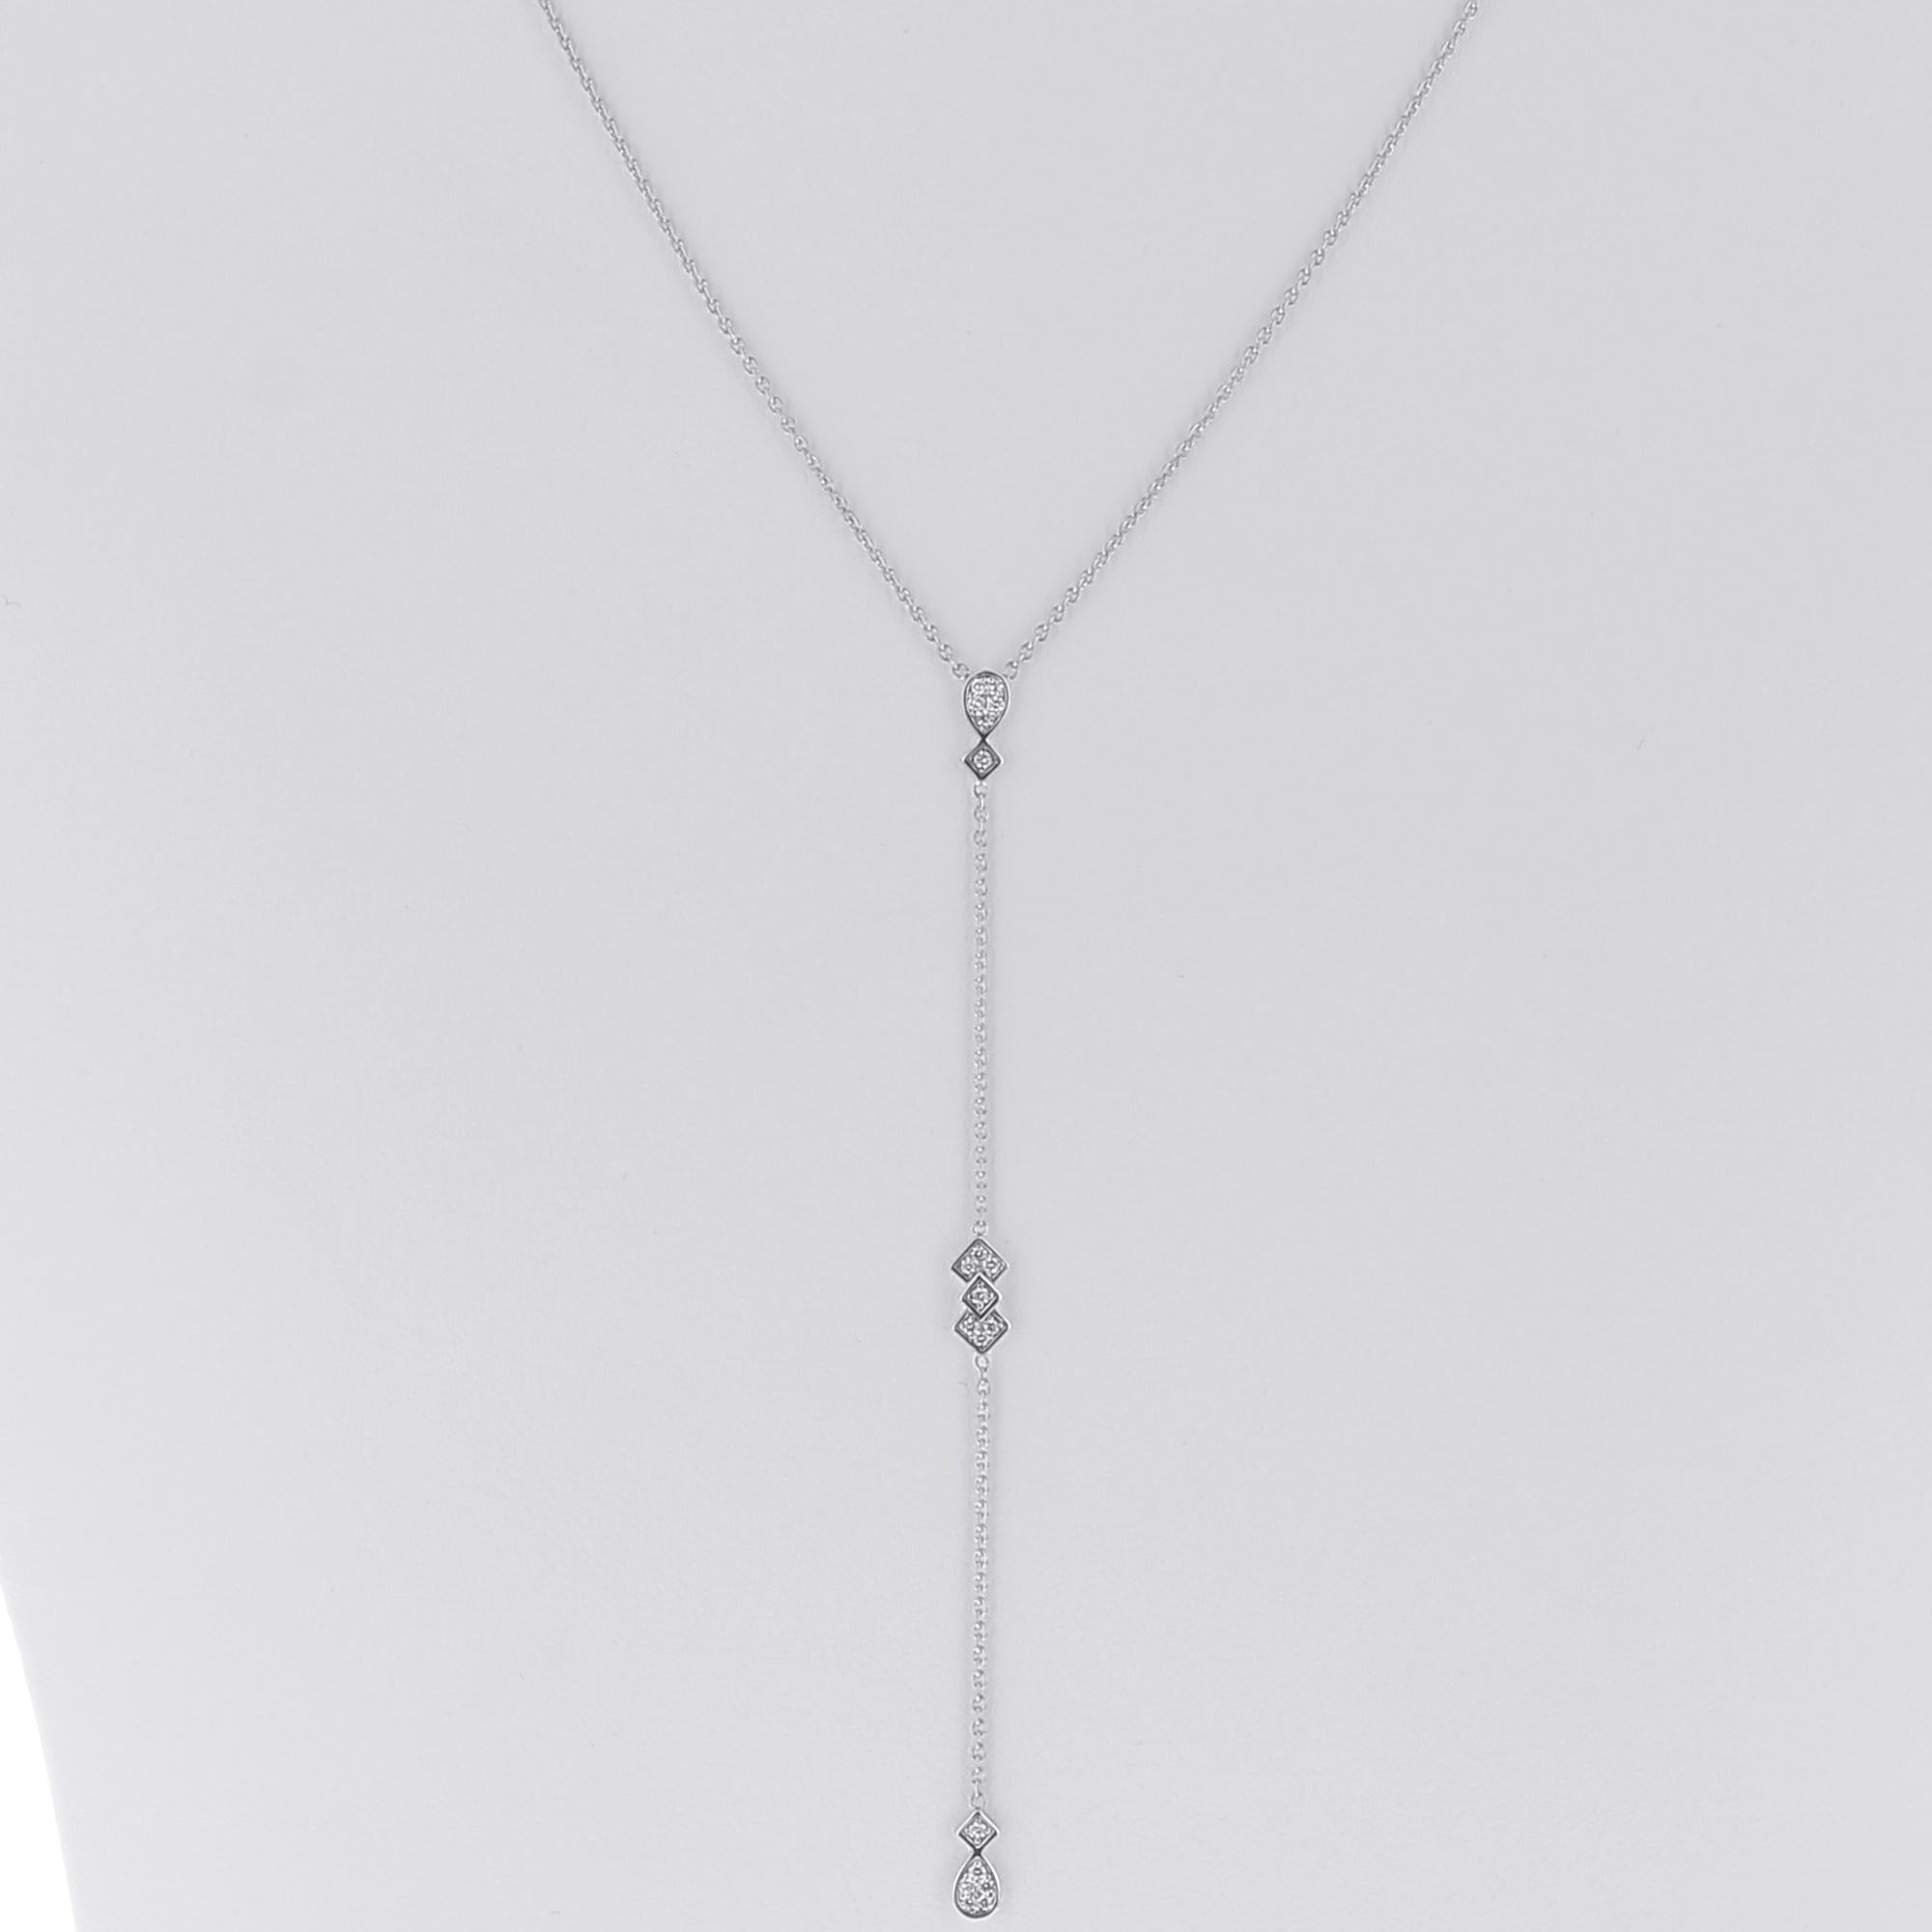 An amazing pendant necklace set with Round Diamonds weighing 0.10 Carats.
The diamonds are GVS grade. 
The Chain is 18K gold. 
The Diamond Necklace weight 3.09 Grams(g).
The Necklace is also available in 18K Rose Gold, 18K Yellow Gold.
